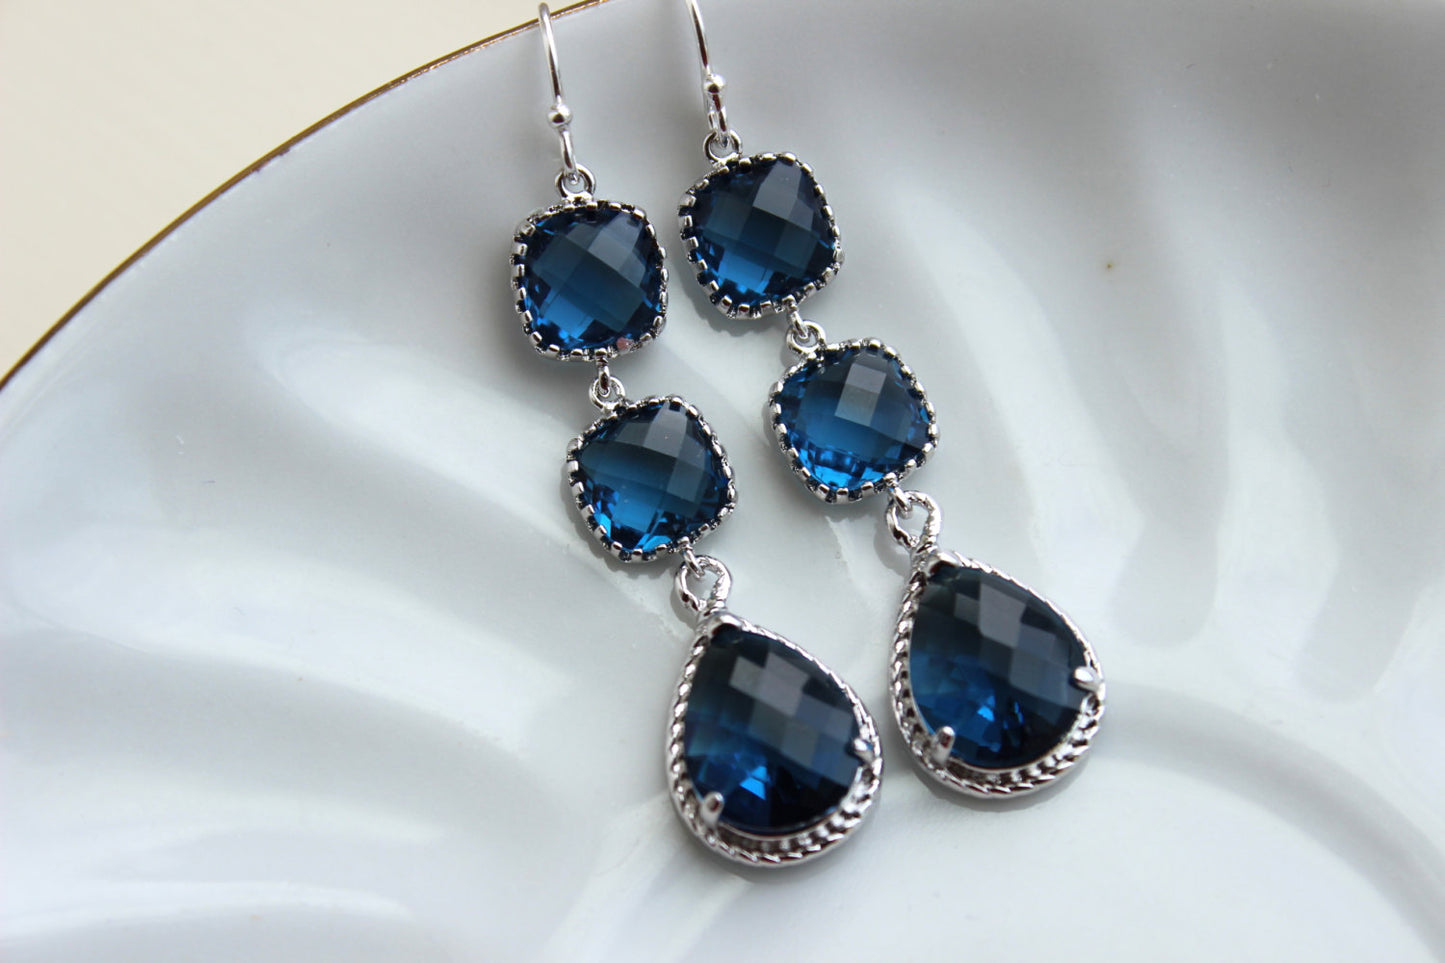 Silver Sapphire Earrings Three Tiered - Navy Blue Wedding Jewelry - Silver Sapphire Bridesmaid Earrings Gift Bridal Jewelry - Something Blue